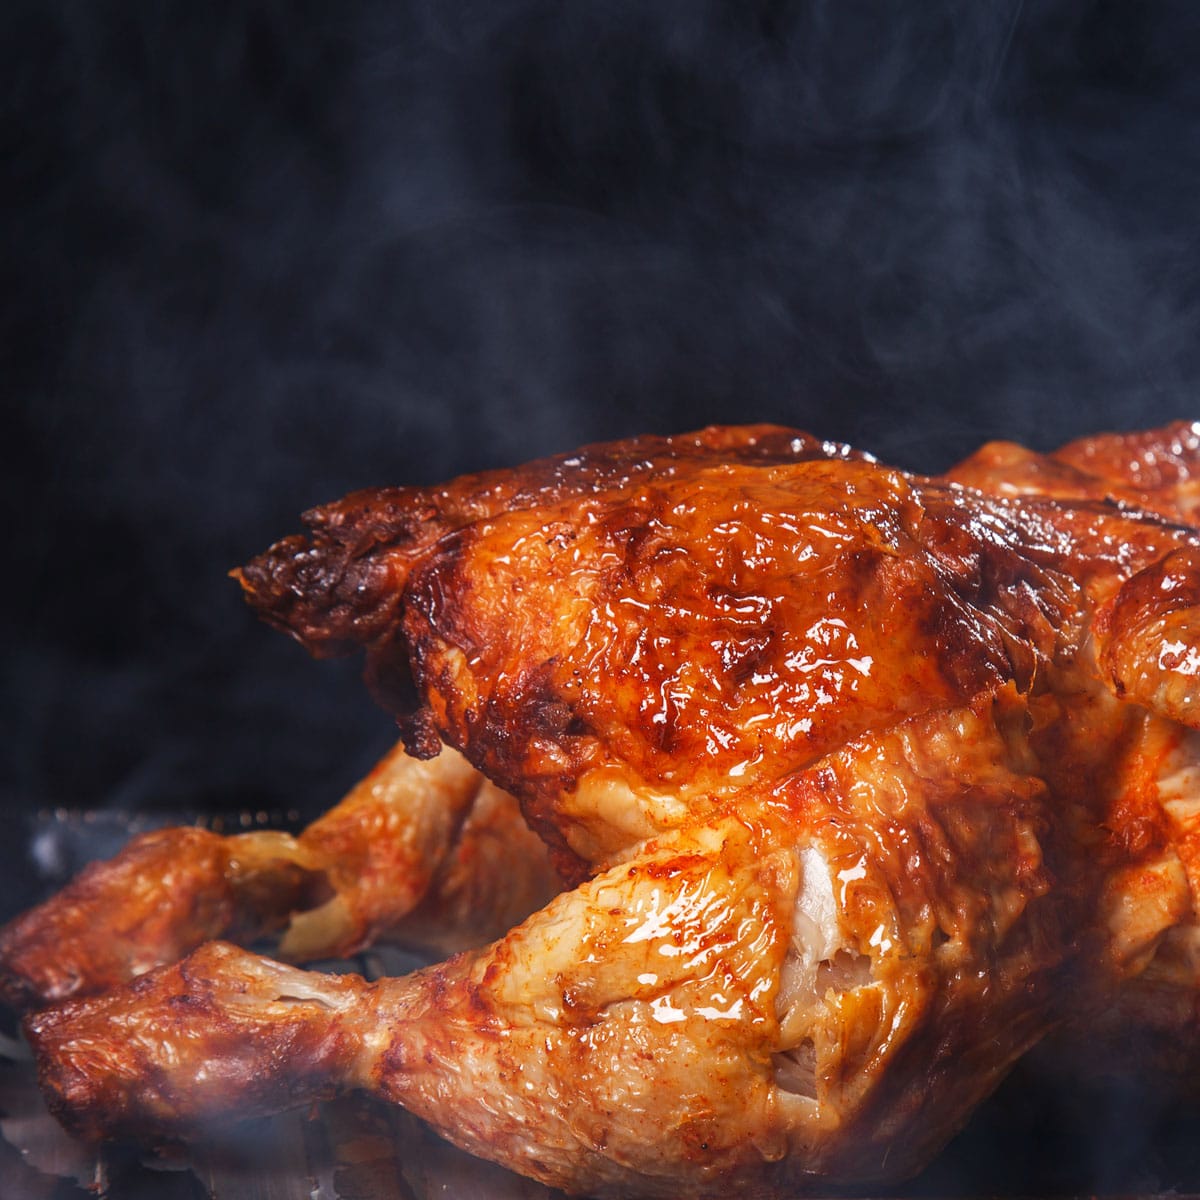 One way to make sure you have a hot meal is to use rotisserie chicken. But what do you do if the chicken isn't eaten right away and it starts to get cold? You can reheat it, but there's an easier way that will keep the chicken warm without ruining its deliciousness